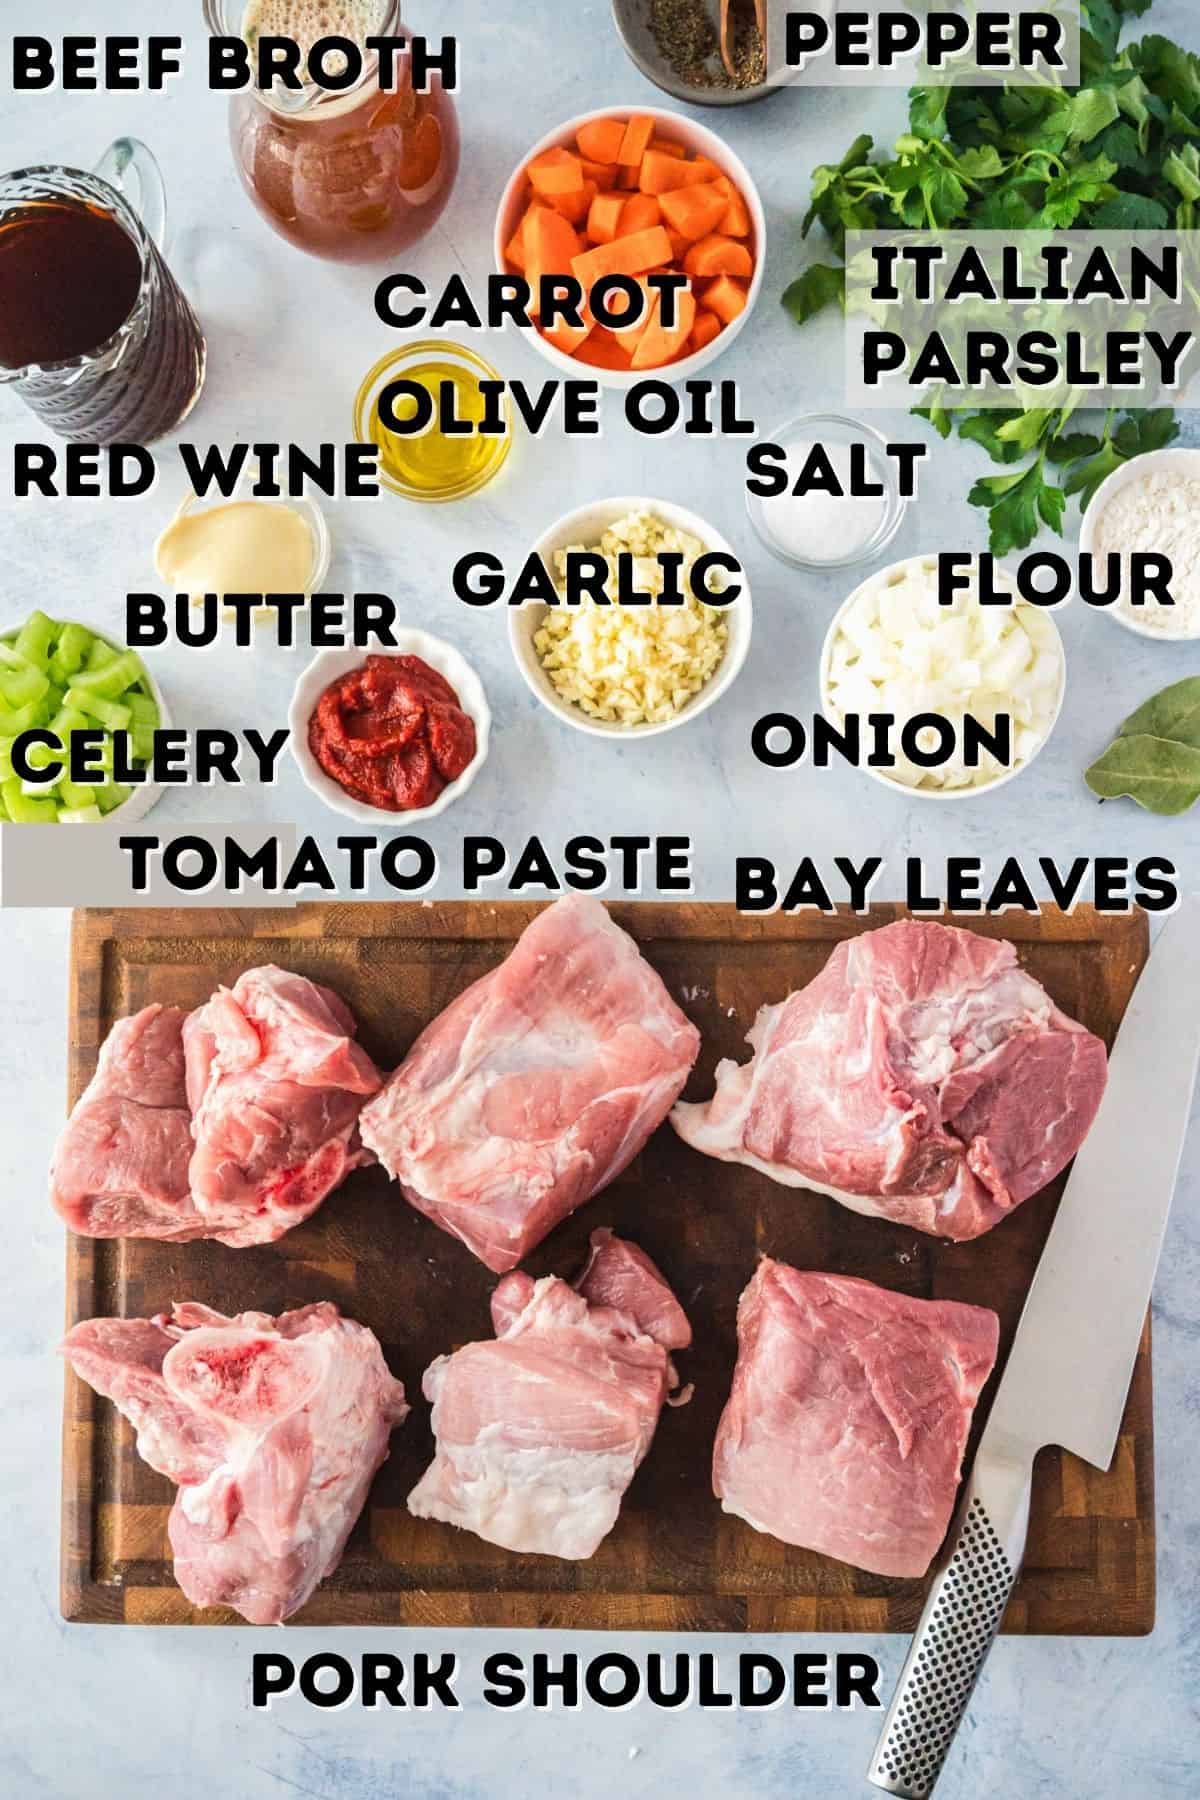 A bunch of uncooked meat and other ingredients.